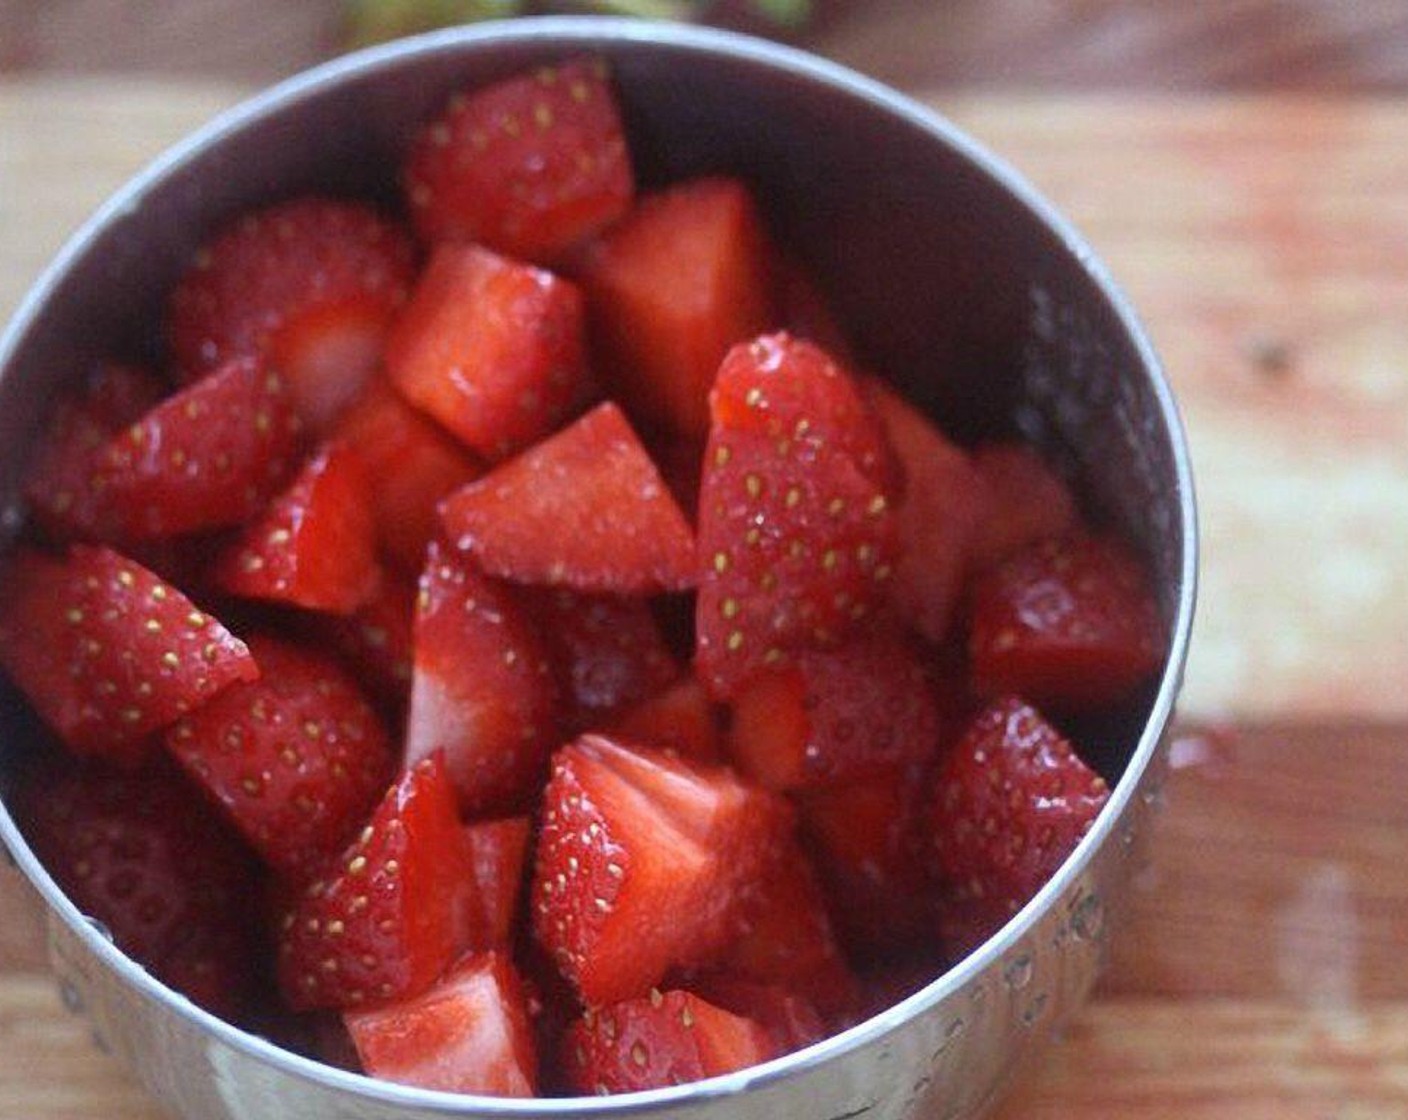 step 1 Dice the Fresh Strawberry (3/4 cup), zest the Lime (1), and melt the Coconut Oil (1/2 cup).